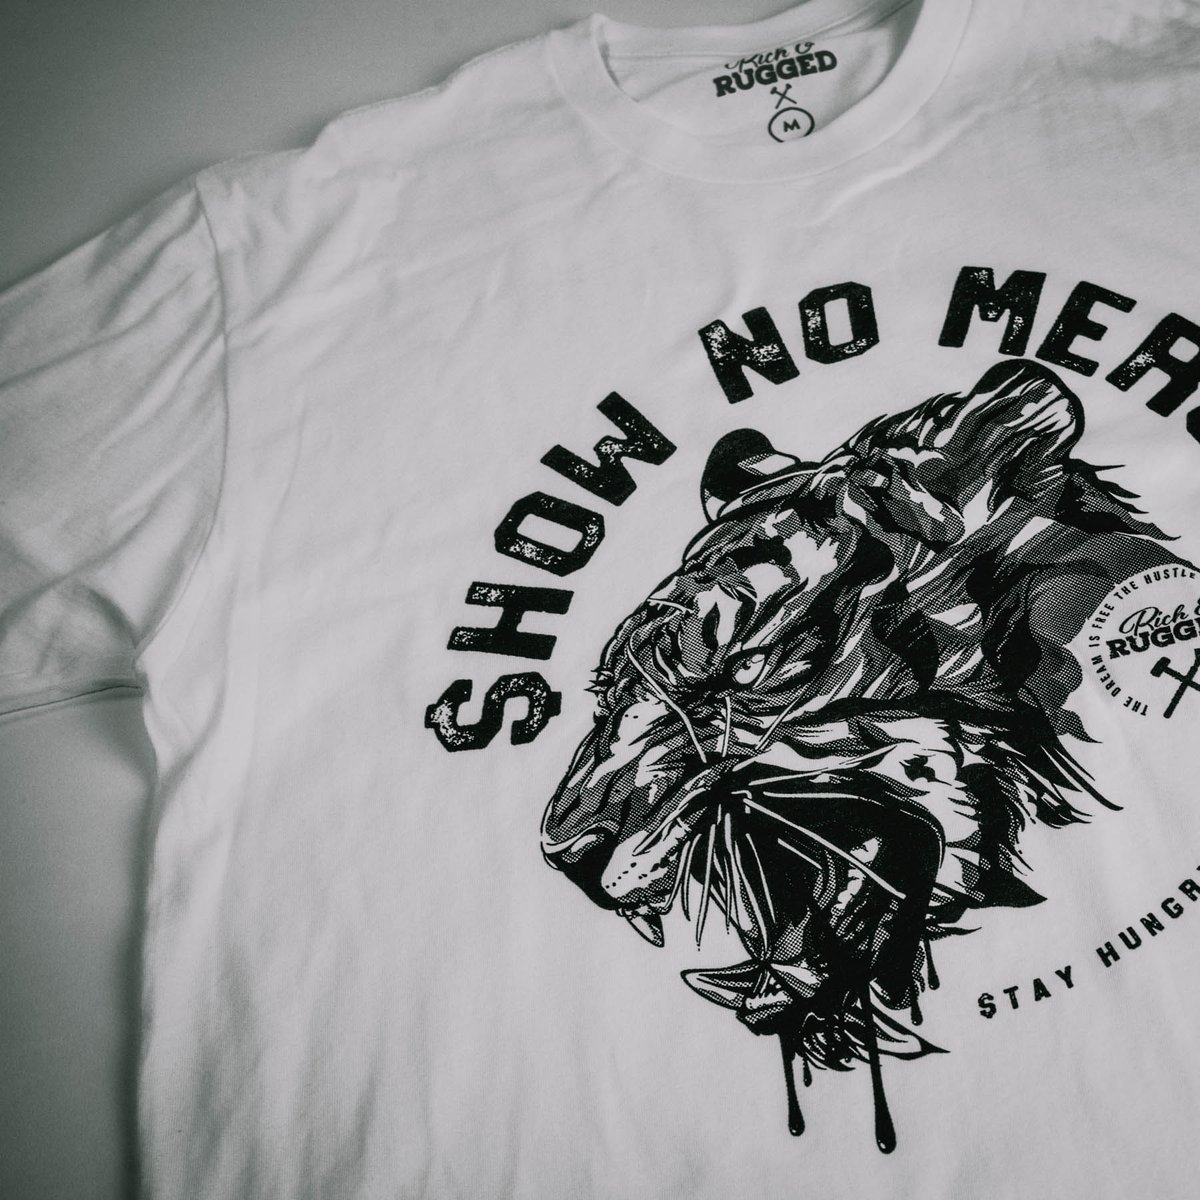 'Show No Mercy'
Limited availability
Richrugged.com
#richrugged #richandrugged #nomercy #merciless #ruthless #streetfashion #filestyles #outfitsavant #ambition #fashionablezone #tiger #stayhungry #hype #hypebeast #chrisfilly #whitetshirt #streetstyle #miami #global